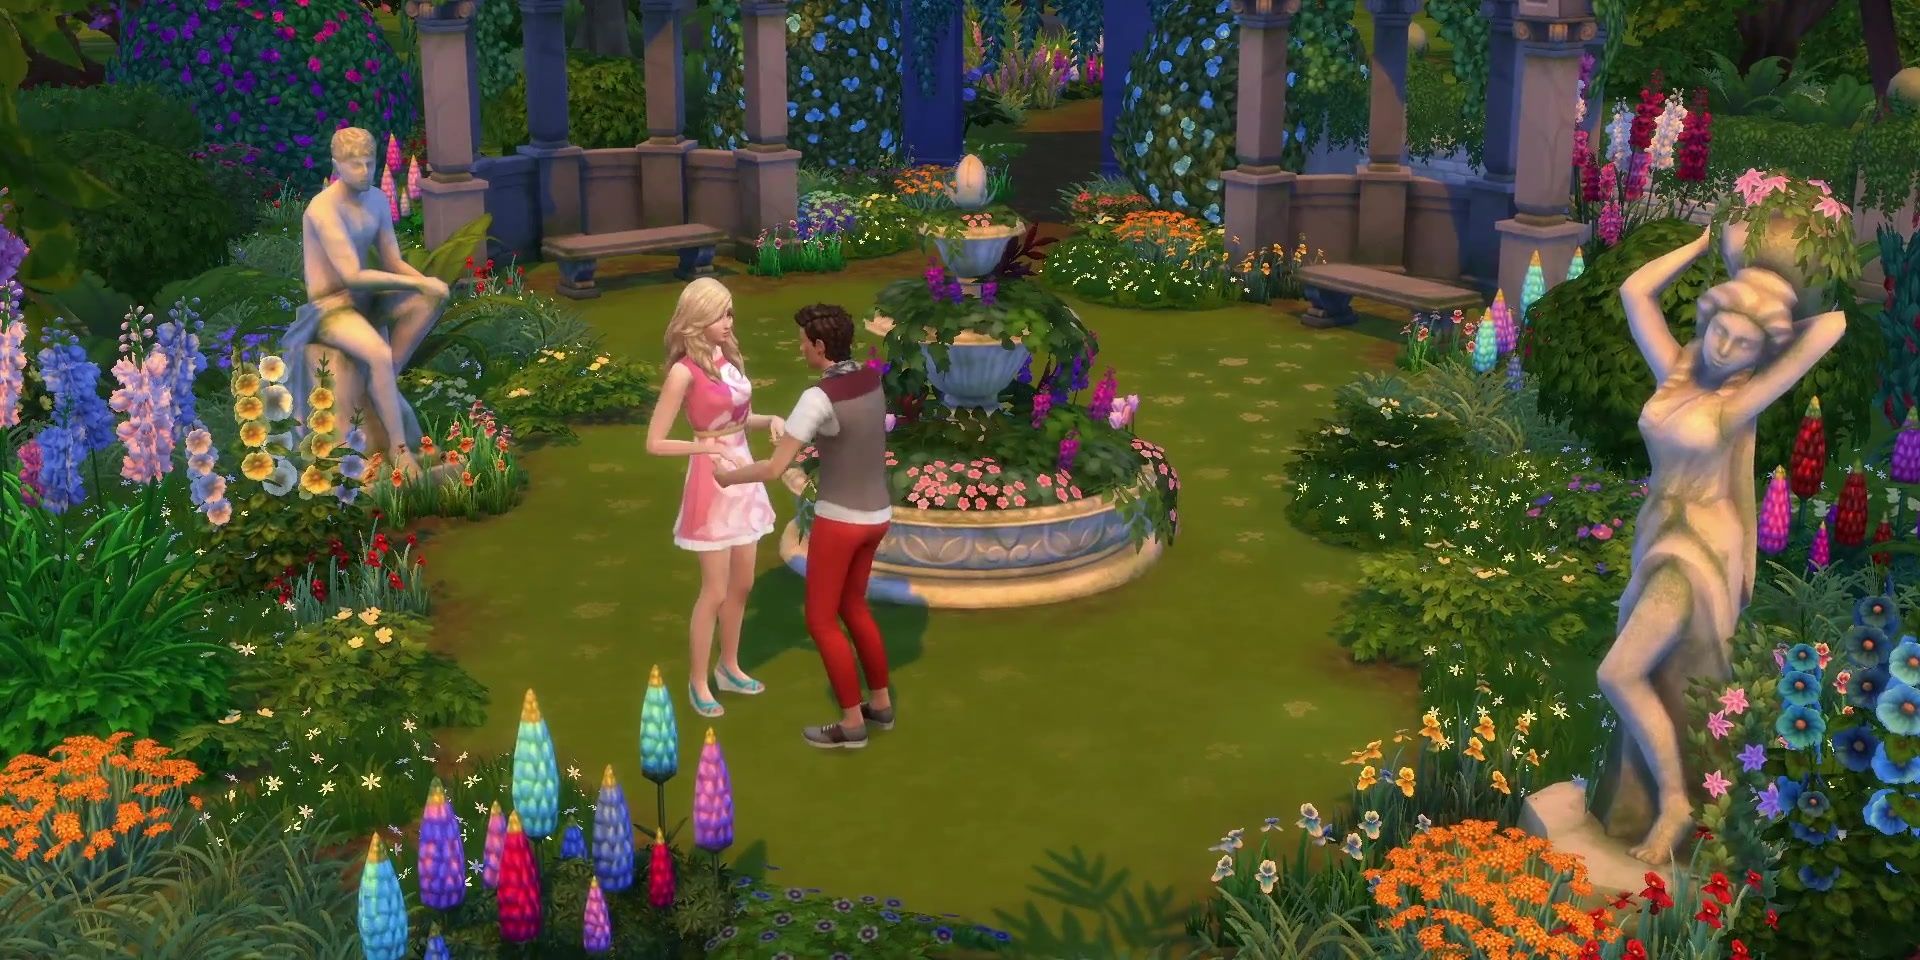 Two Sims get romantic in a well-decorated garden, complete with statues, an abundance of flowers, and a beautiful fountain.